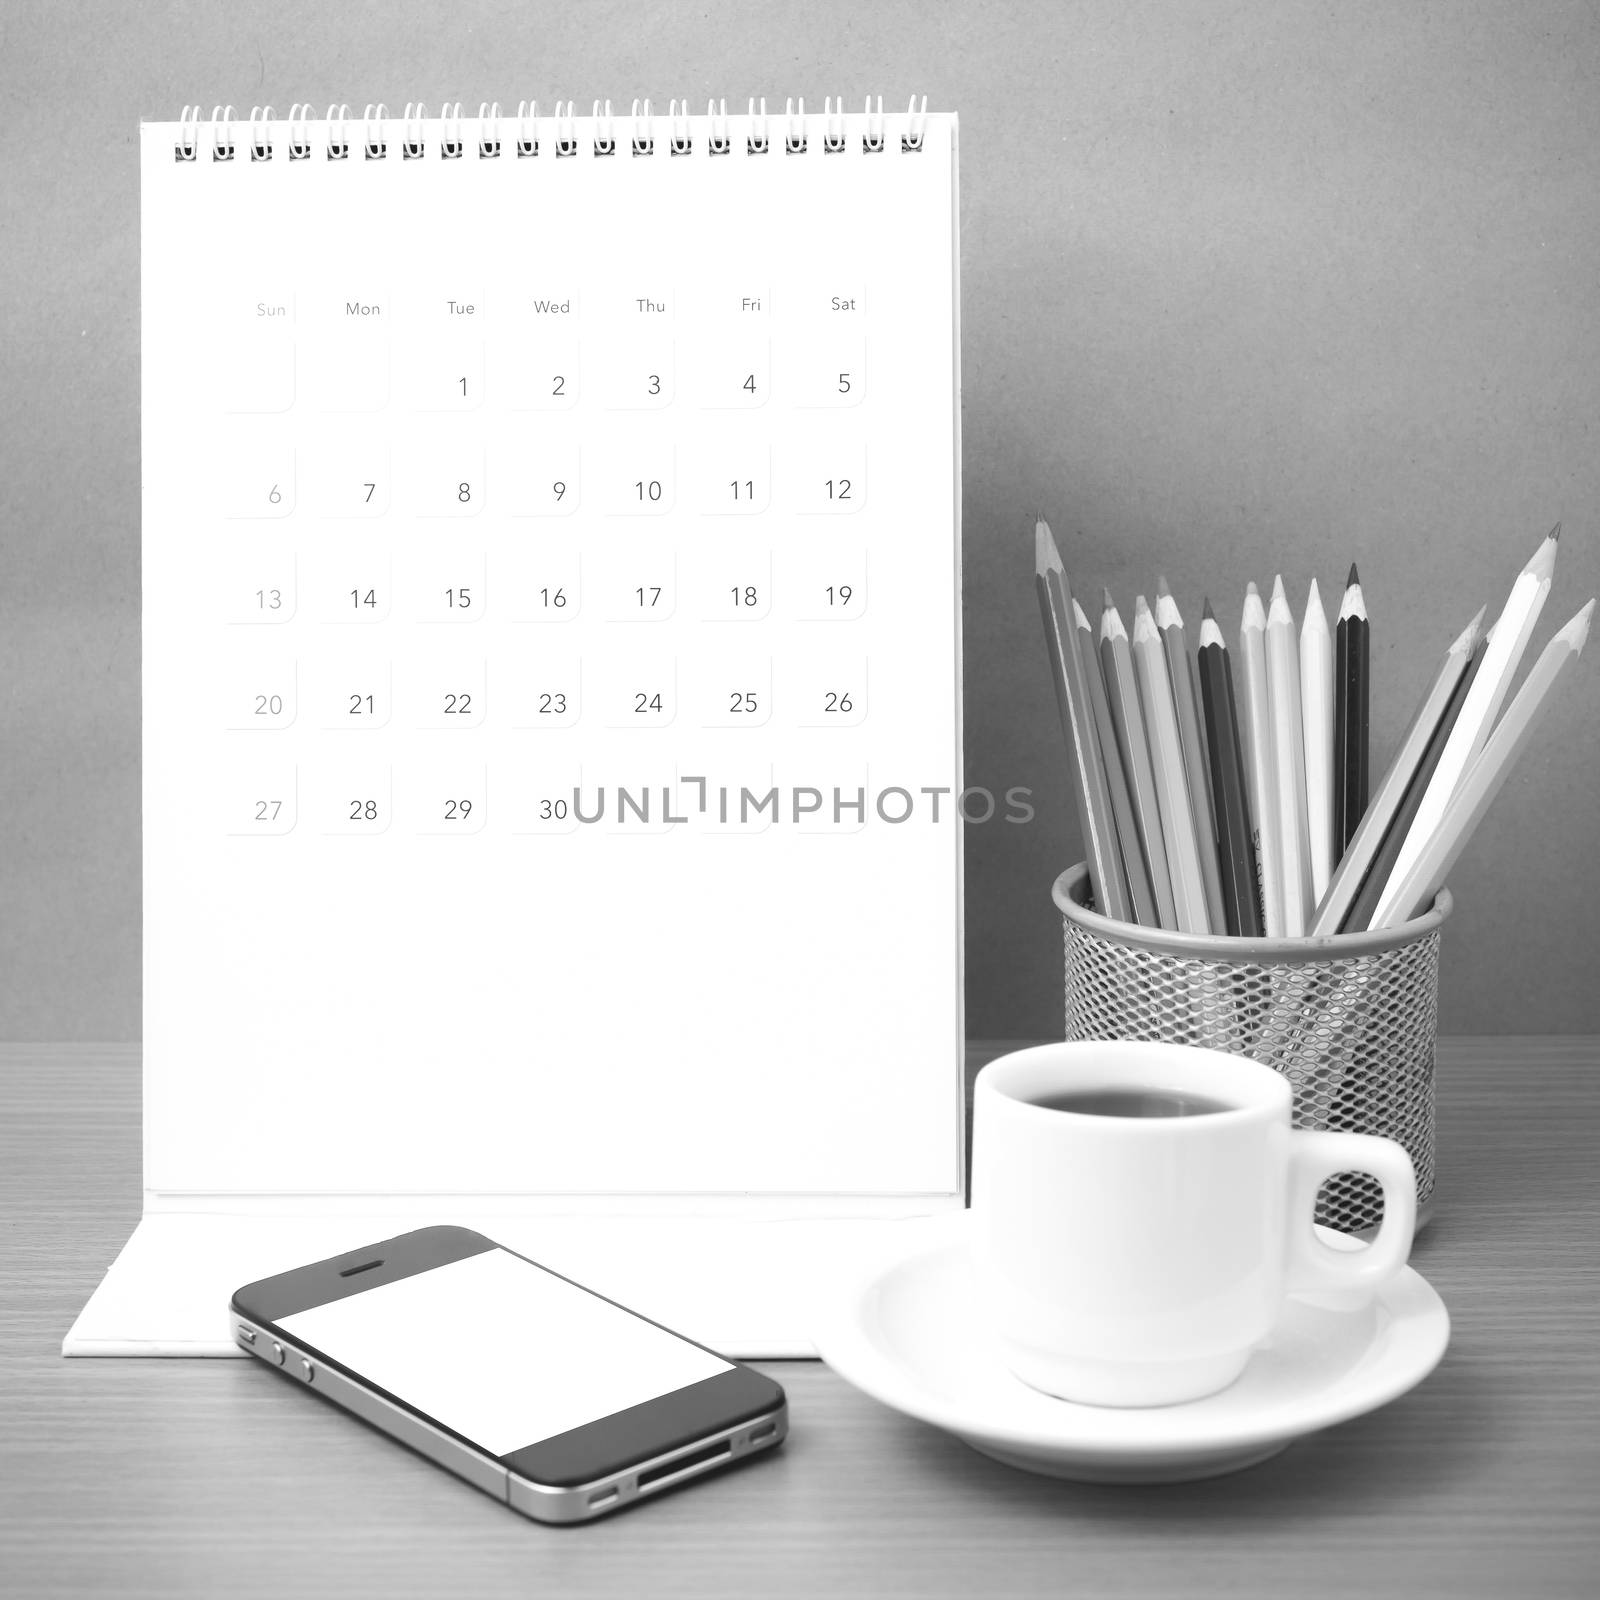 coffee,phone,calendar and color pencil on wood table background black and white color